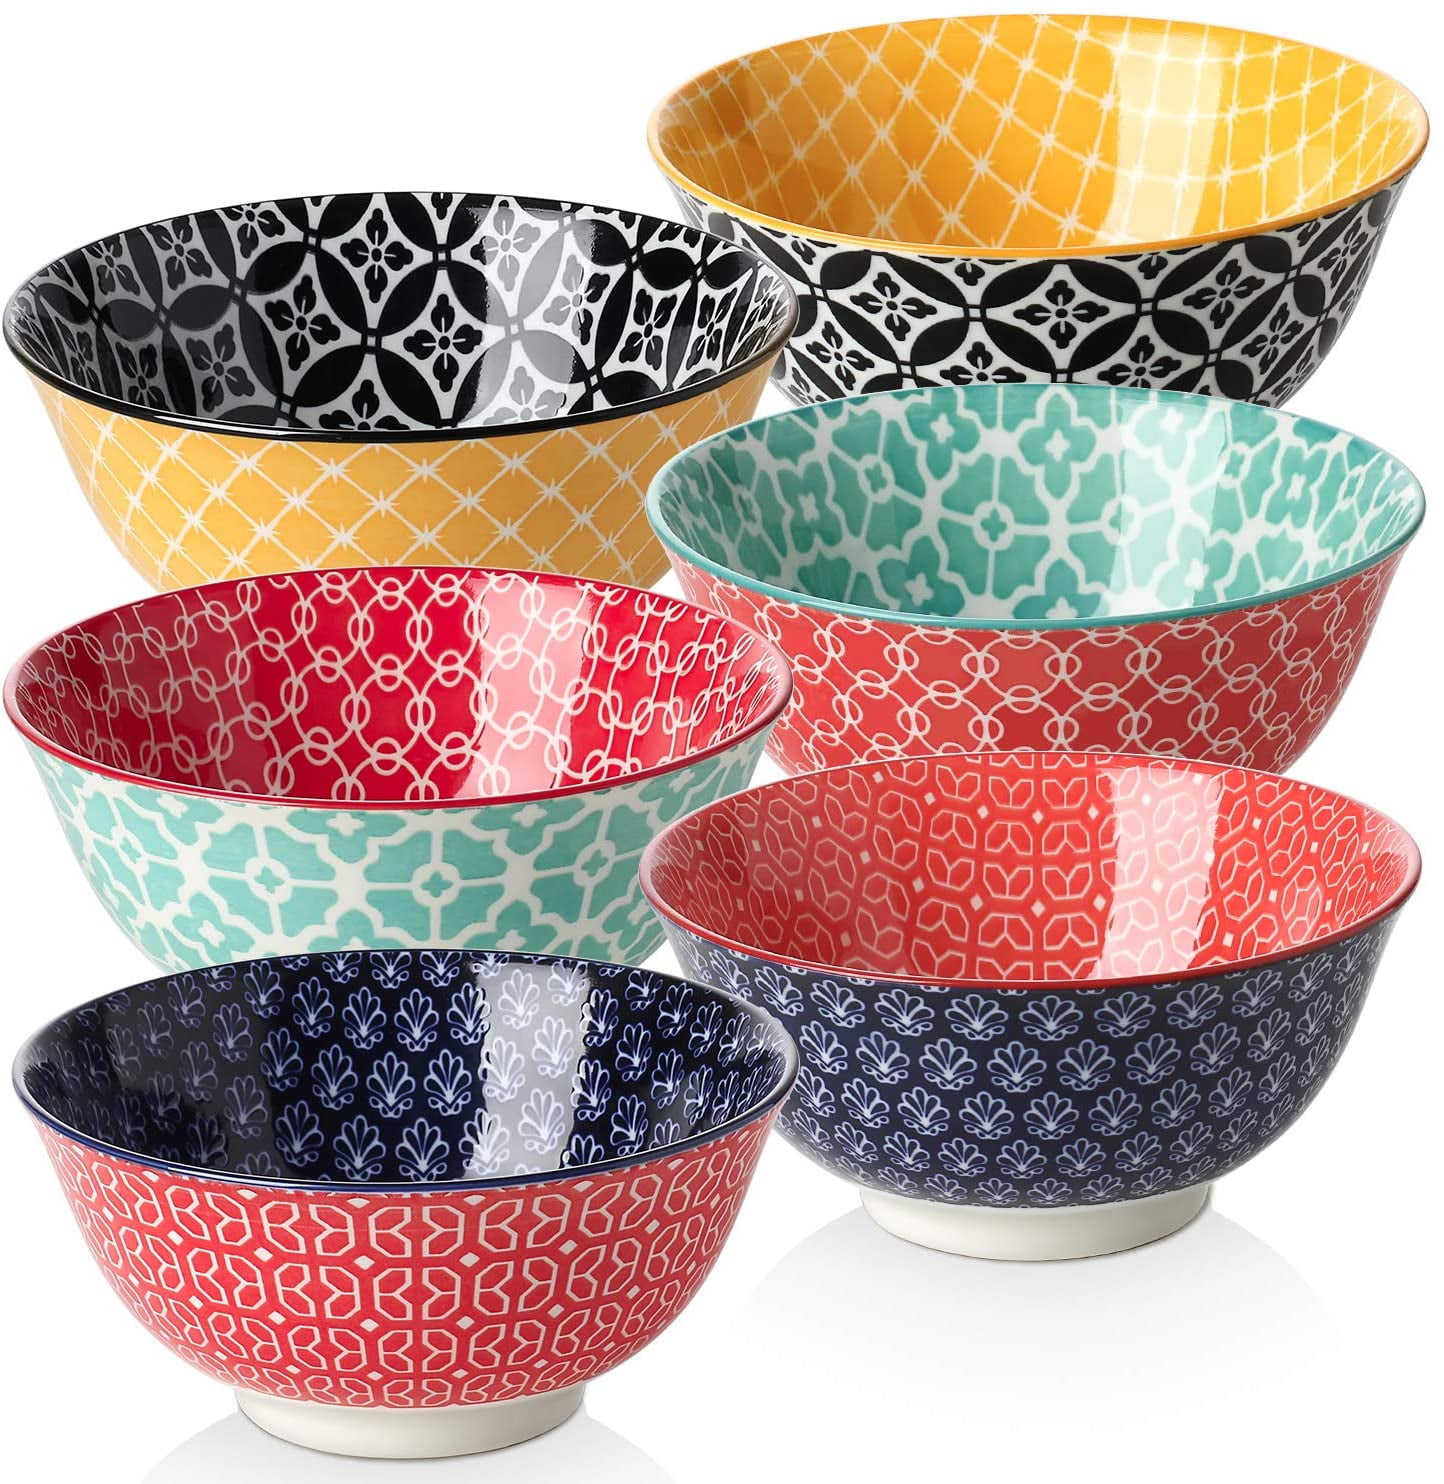  DOWAN Mixing Bowls, Ceramic Mixing Bowls for Kitchen, Colorful  Vibrant Nesting Bowls for Cooking, Baking, Prepping, Serving, Salad,  Housewarming Gift, Microwave Dishwasher Safe, 3.7/2/1 Qt, Set of 3: Home &  Kitchen